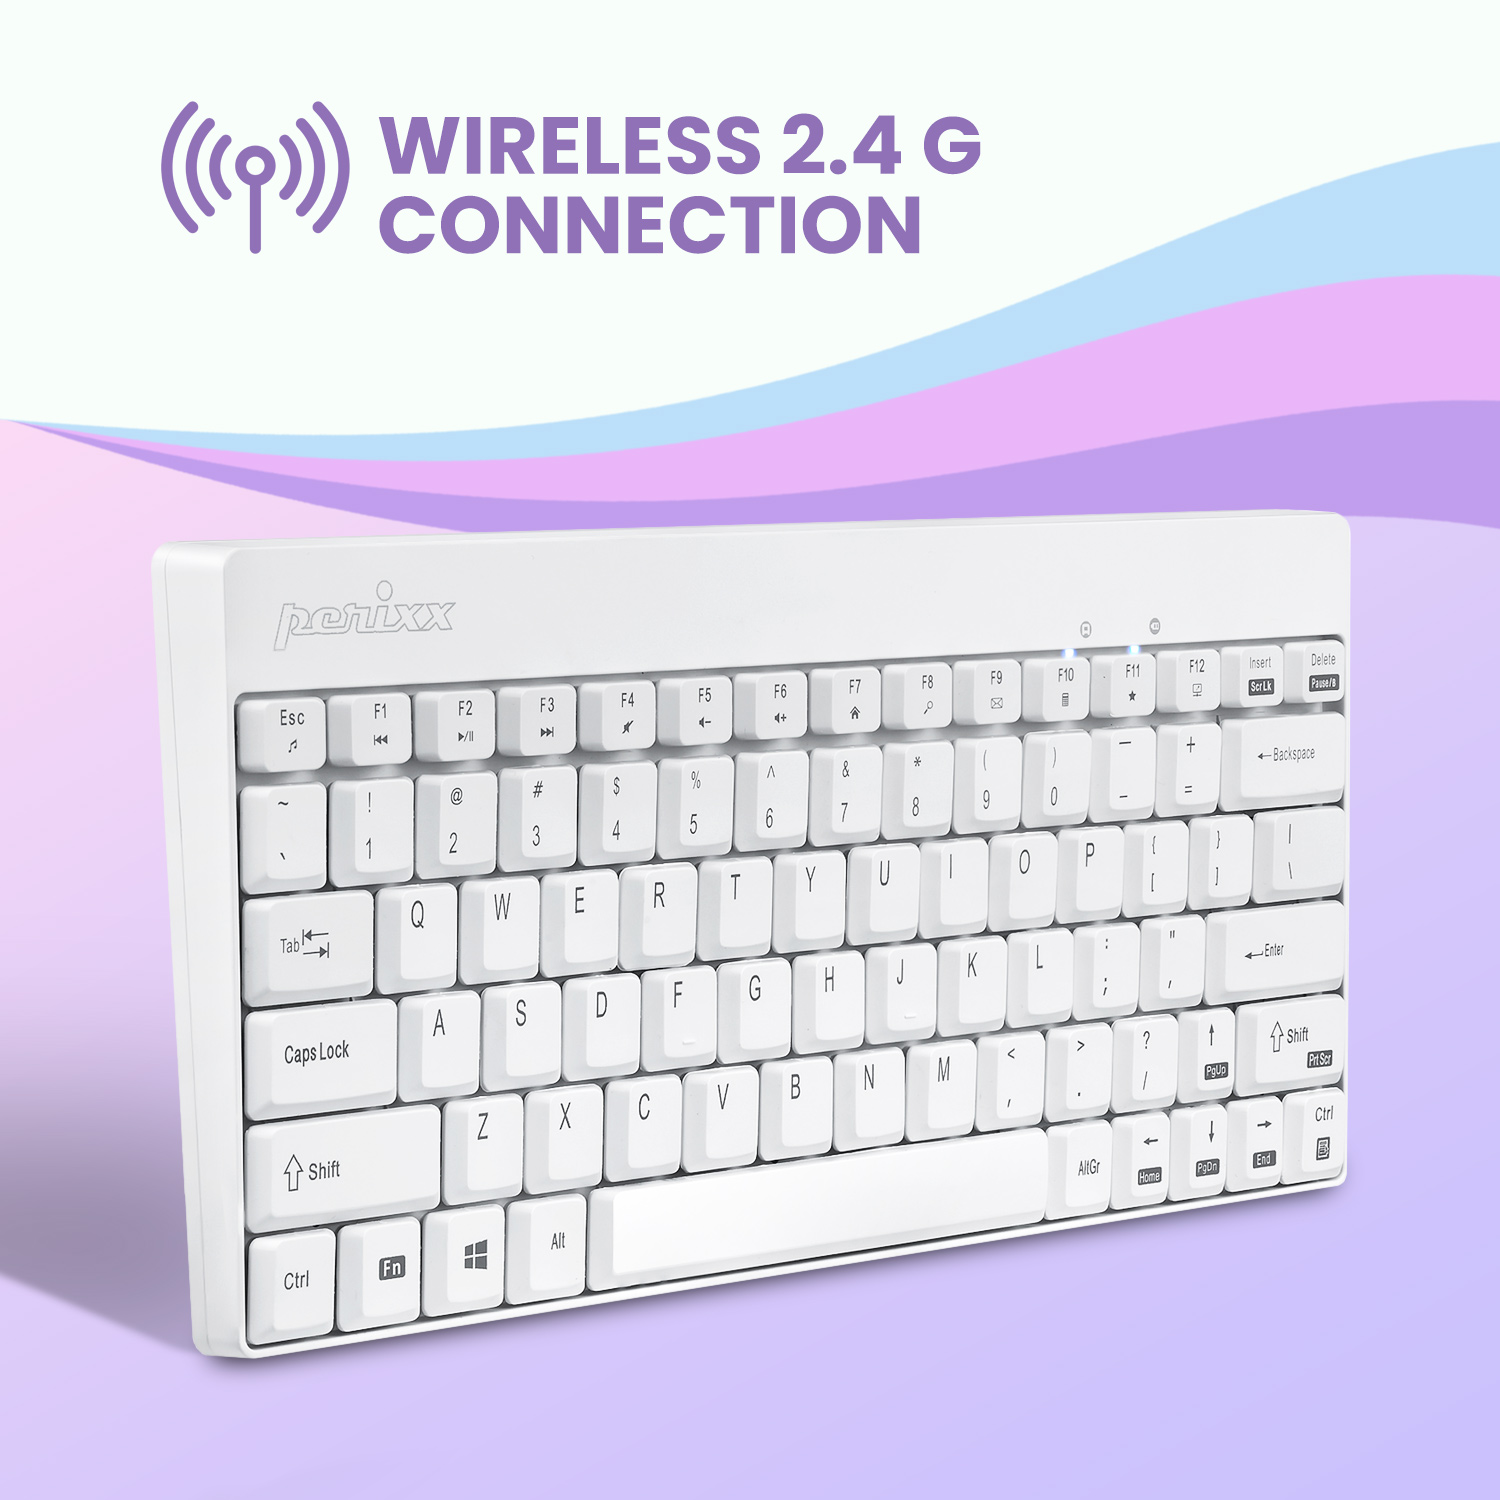 Wireless 2.4 G Connection